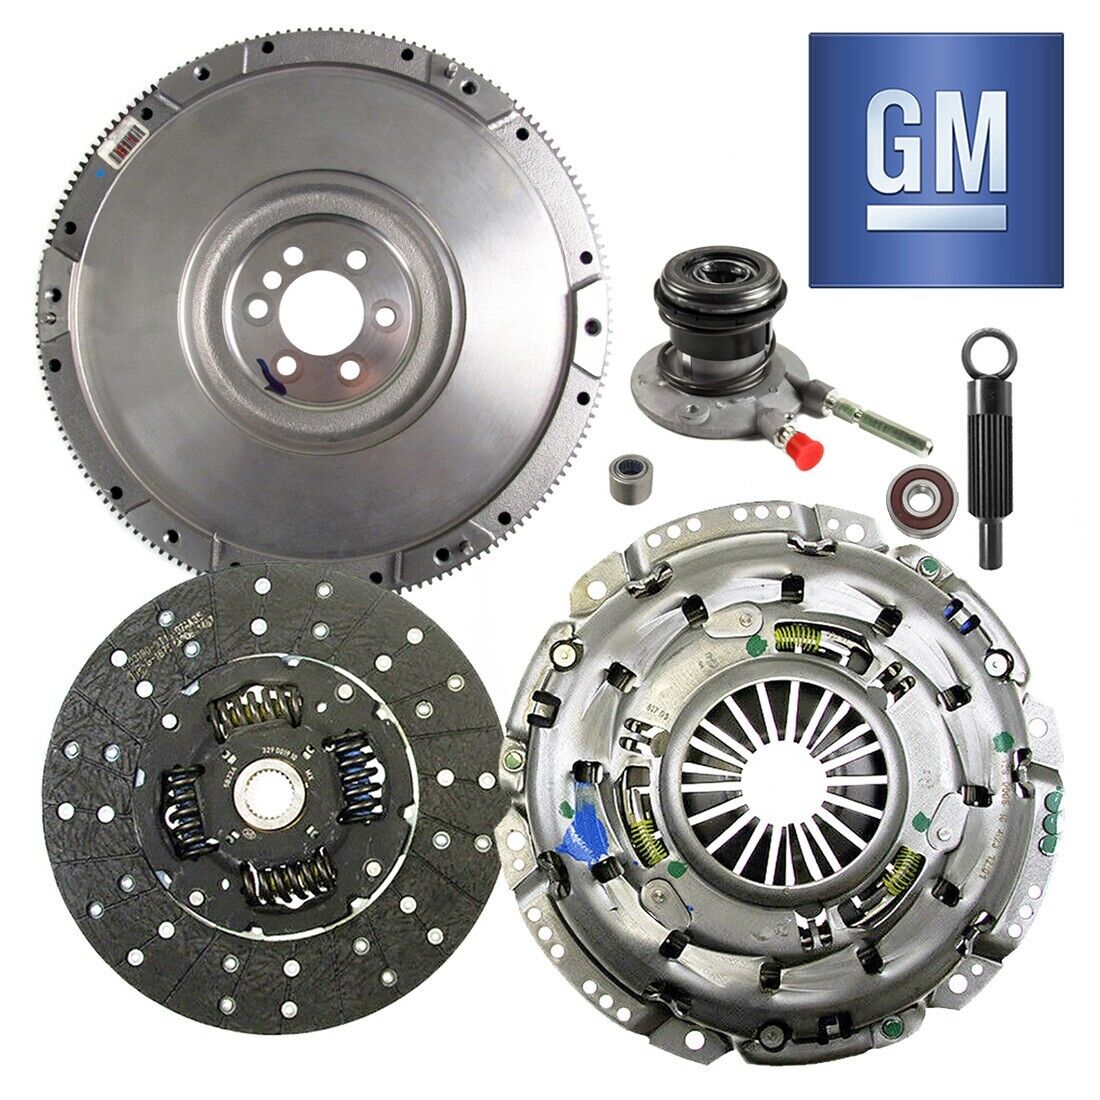 GM OEM LS7 COMPLETE CLUTCH COVER DISC SLAVE FLYWHEEL \'RETRO-FIT\' KIT for GTO LS2